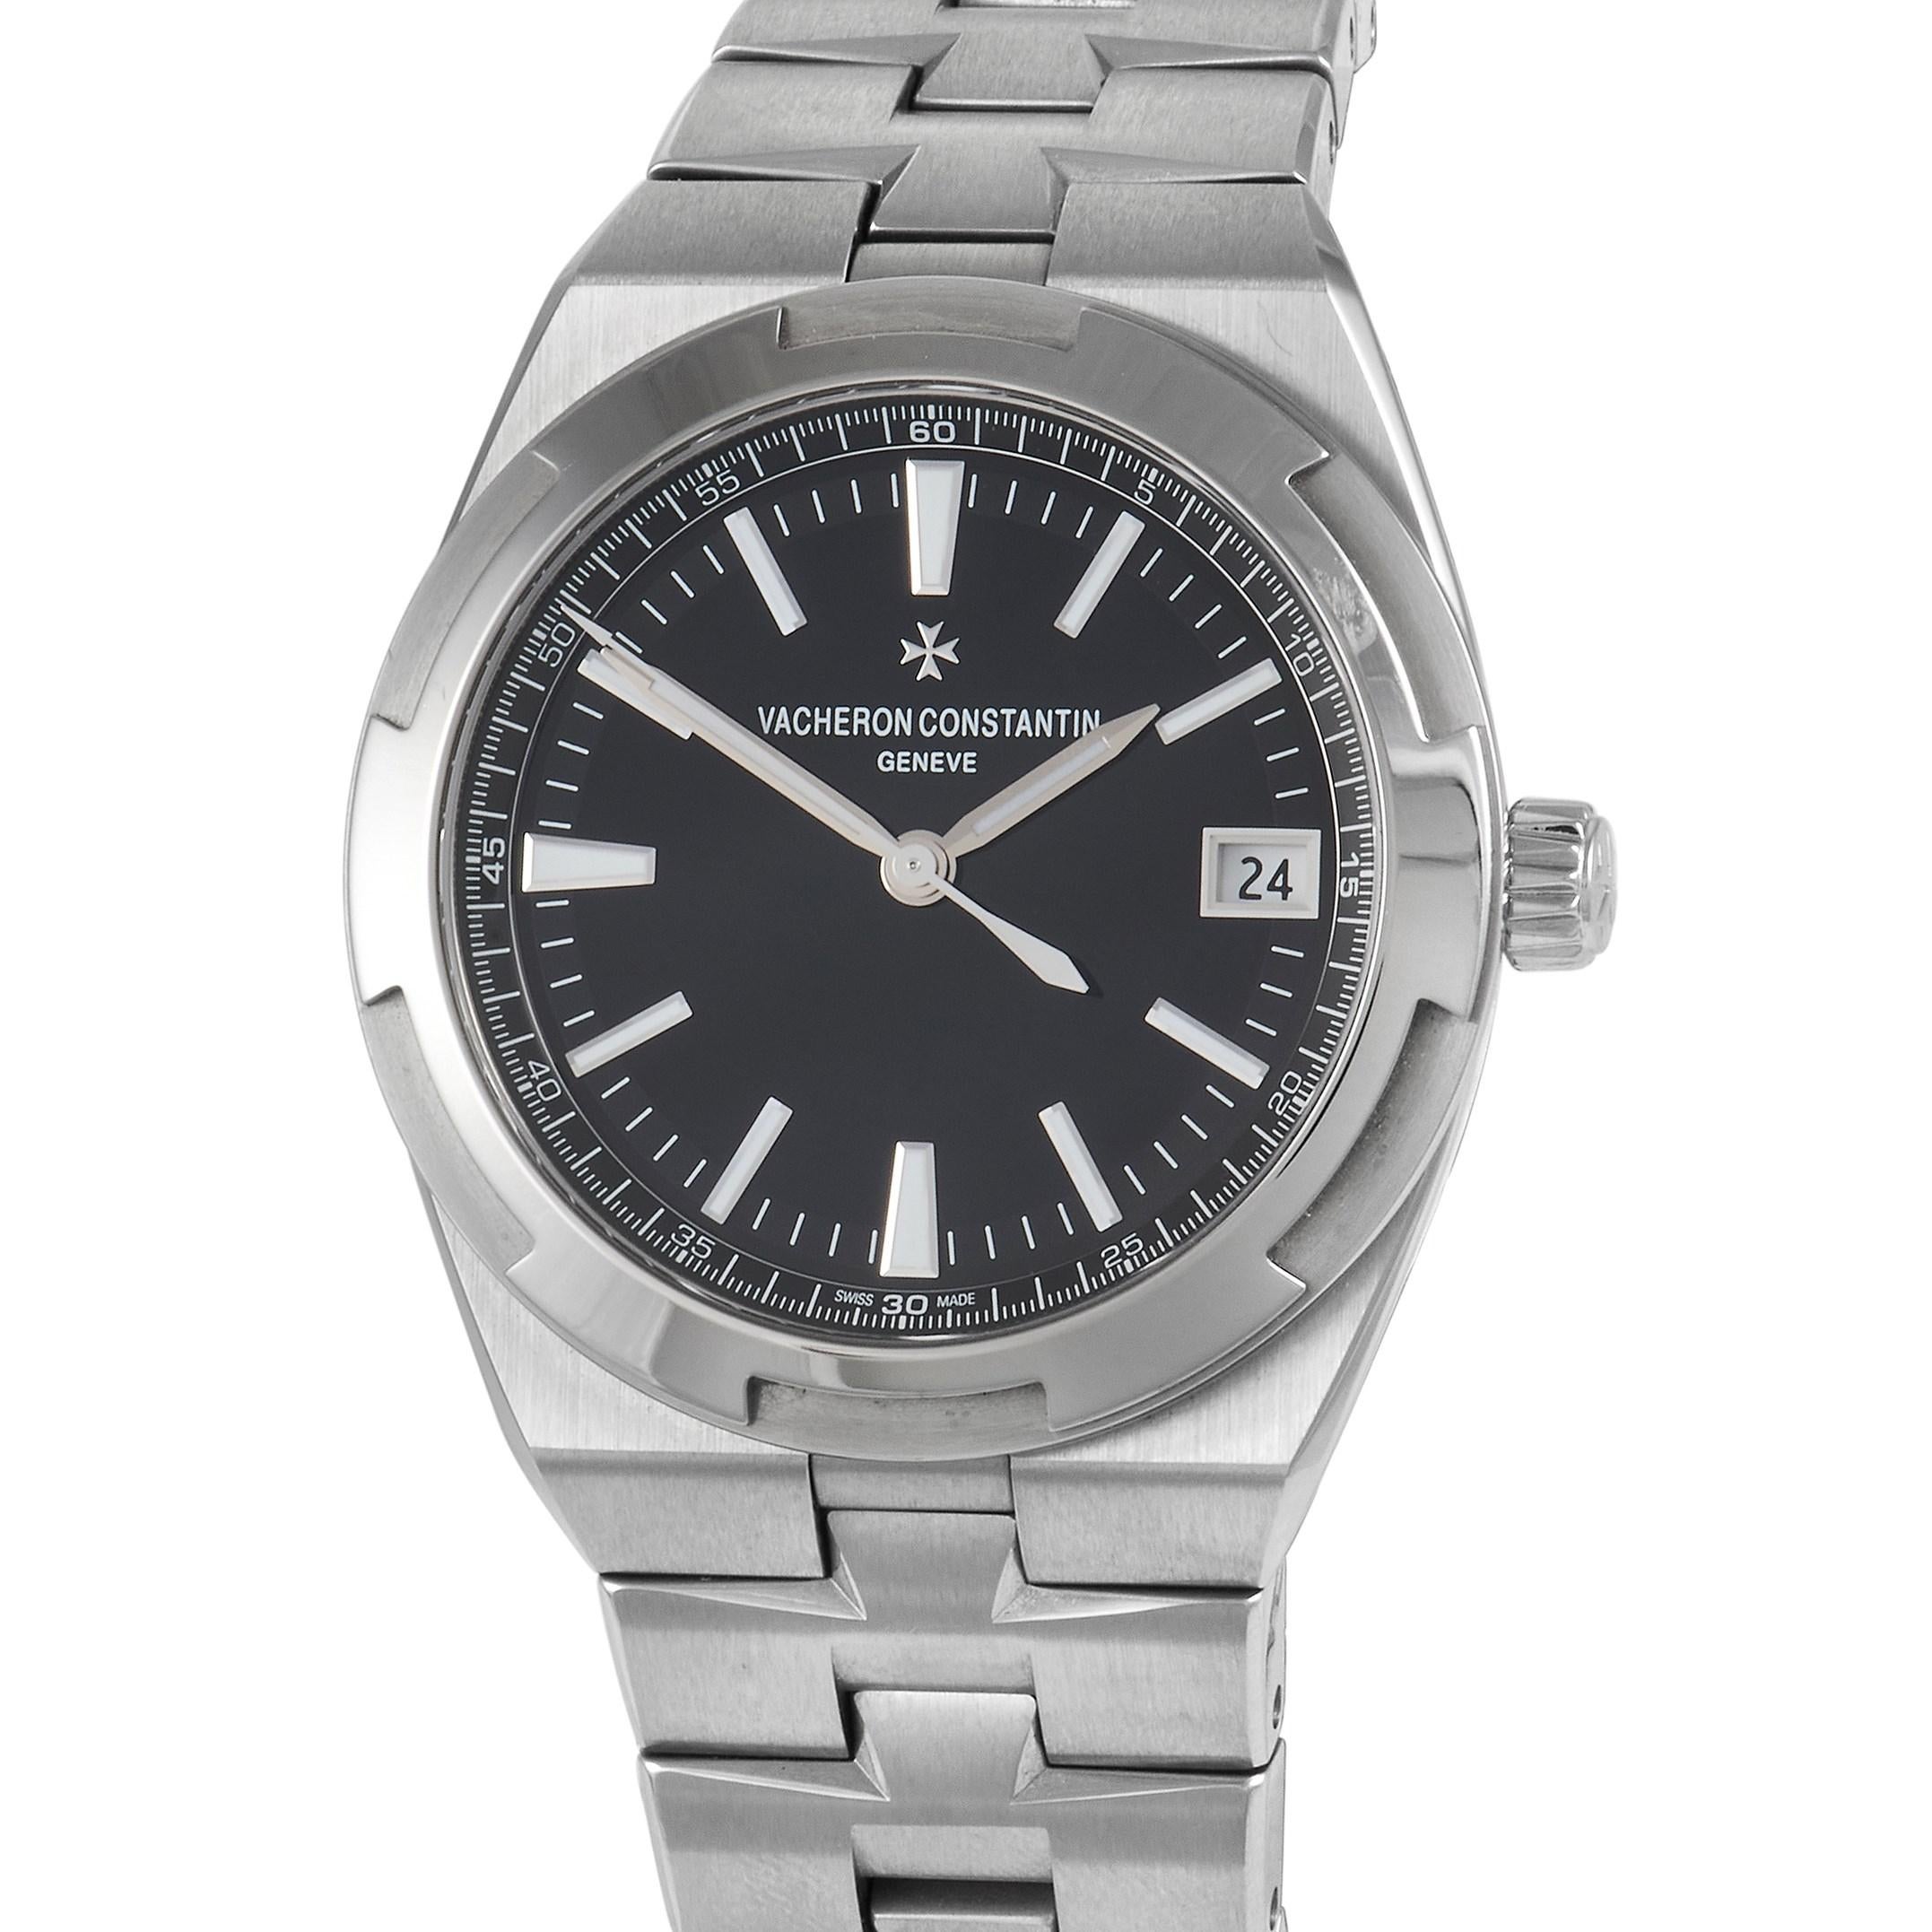 This good-looking watch is the epitome of simplicity. Perfect for everyday wear, the Vacheron Constantin Overseas Watch 4500V/110A-B483 features an elegant black dial that stands out against a silver-toned stainless steel case and bracelet. The